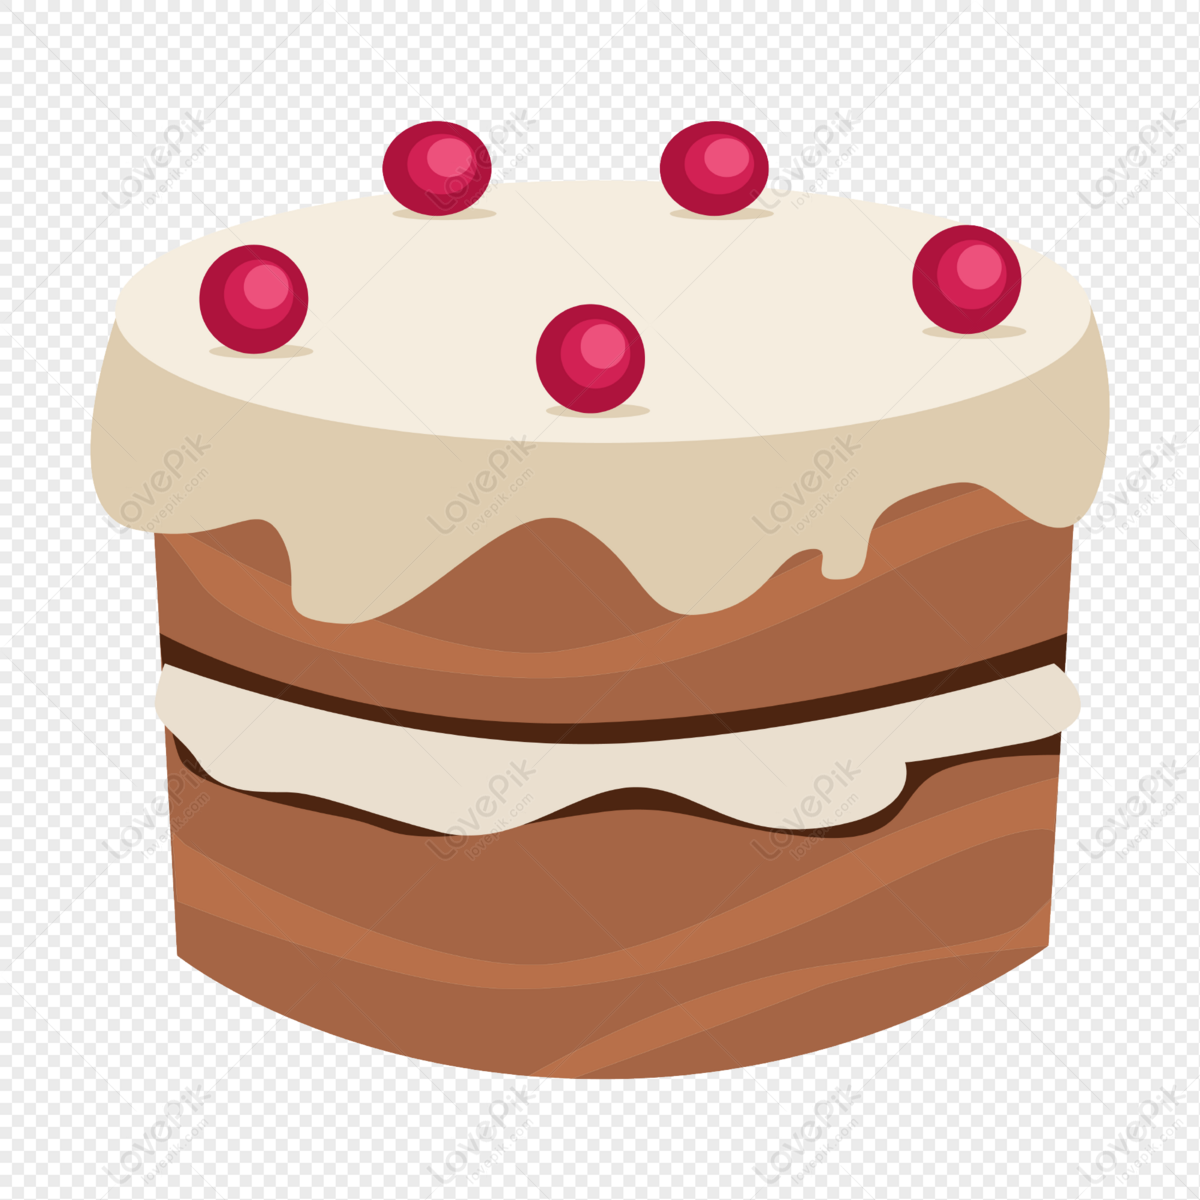 Cake Vector png images | PNGEgg